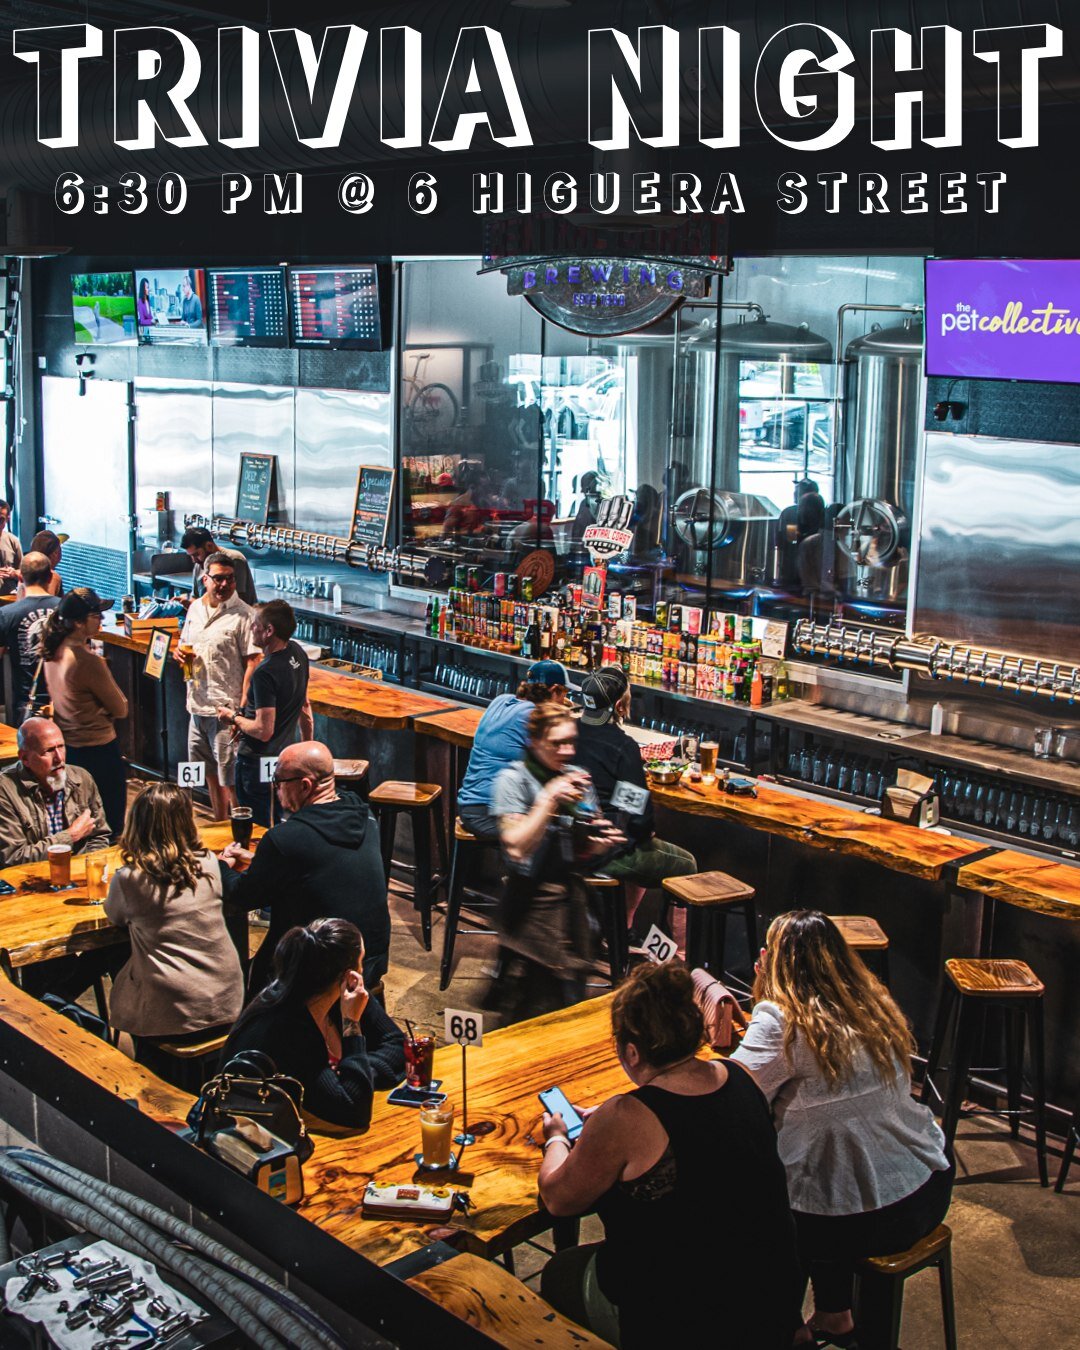 Join us tonight at 6:30 pm on Higuera Street for Tuesday Trivia Night with @headgamestrivia! Gather your team of up to 6 people, arrive early for the best seats, and compete for exciting prizes! It's the perfect blend of brain-teasing fun and great b